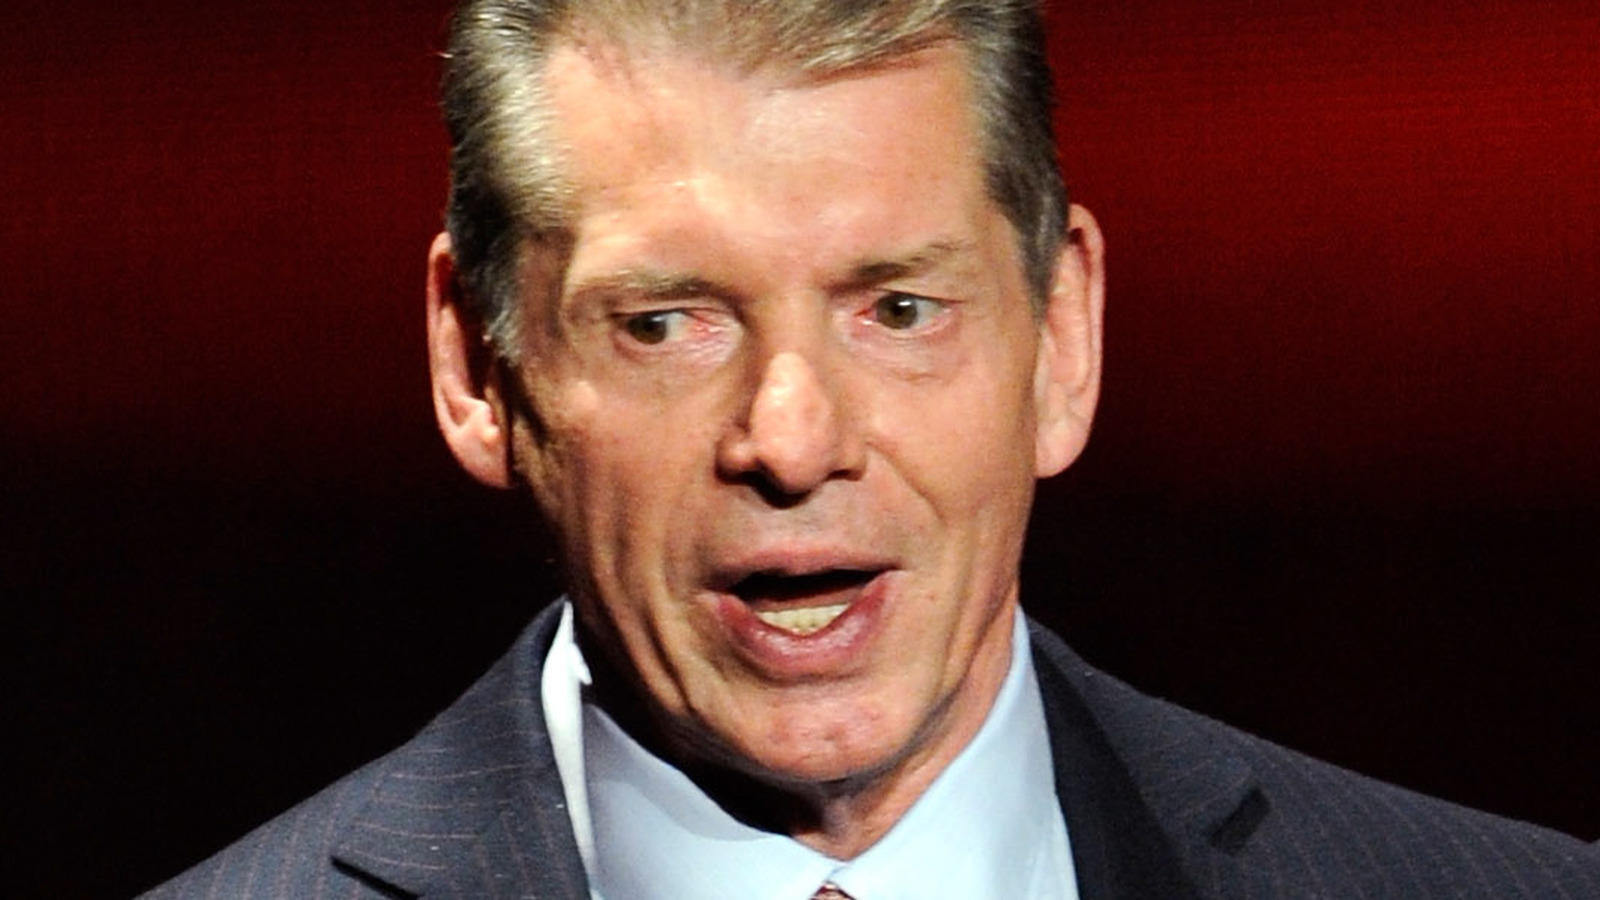 Dark Side Of The Ring's Evan Husney Comments On Possibility Of Vince McMahon Episode